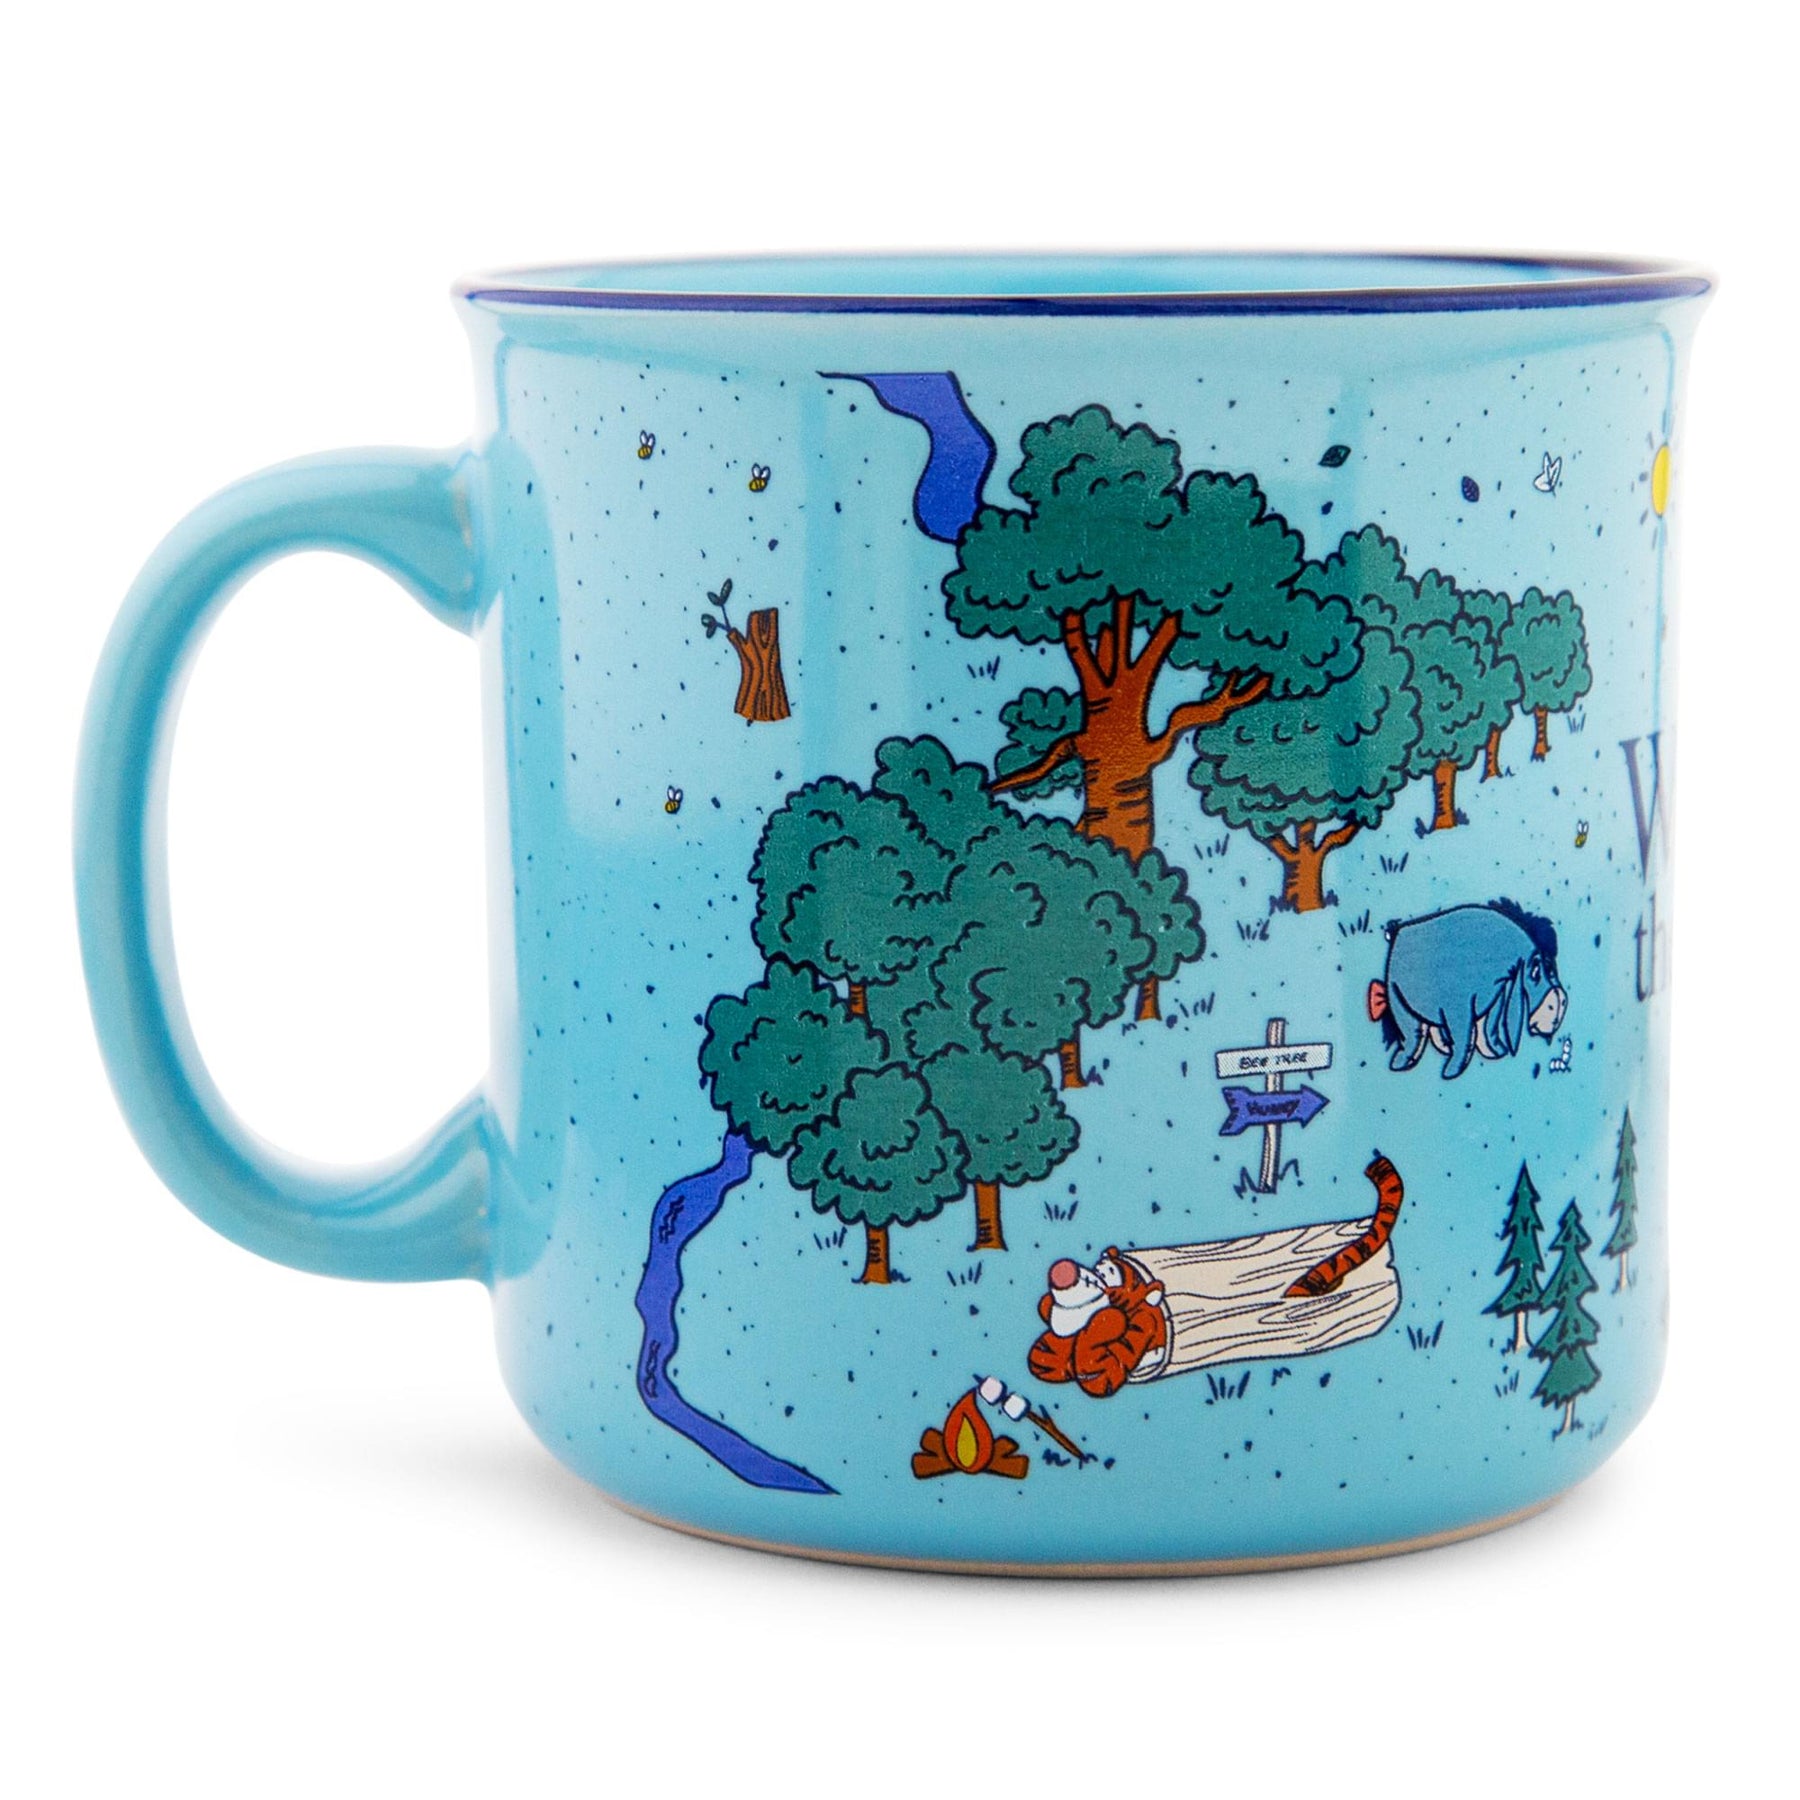 Disney Winnie the Pooh Map of the Hundred Acre Wood Ceramic Mug | Holds 20 Ounce